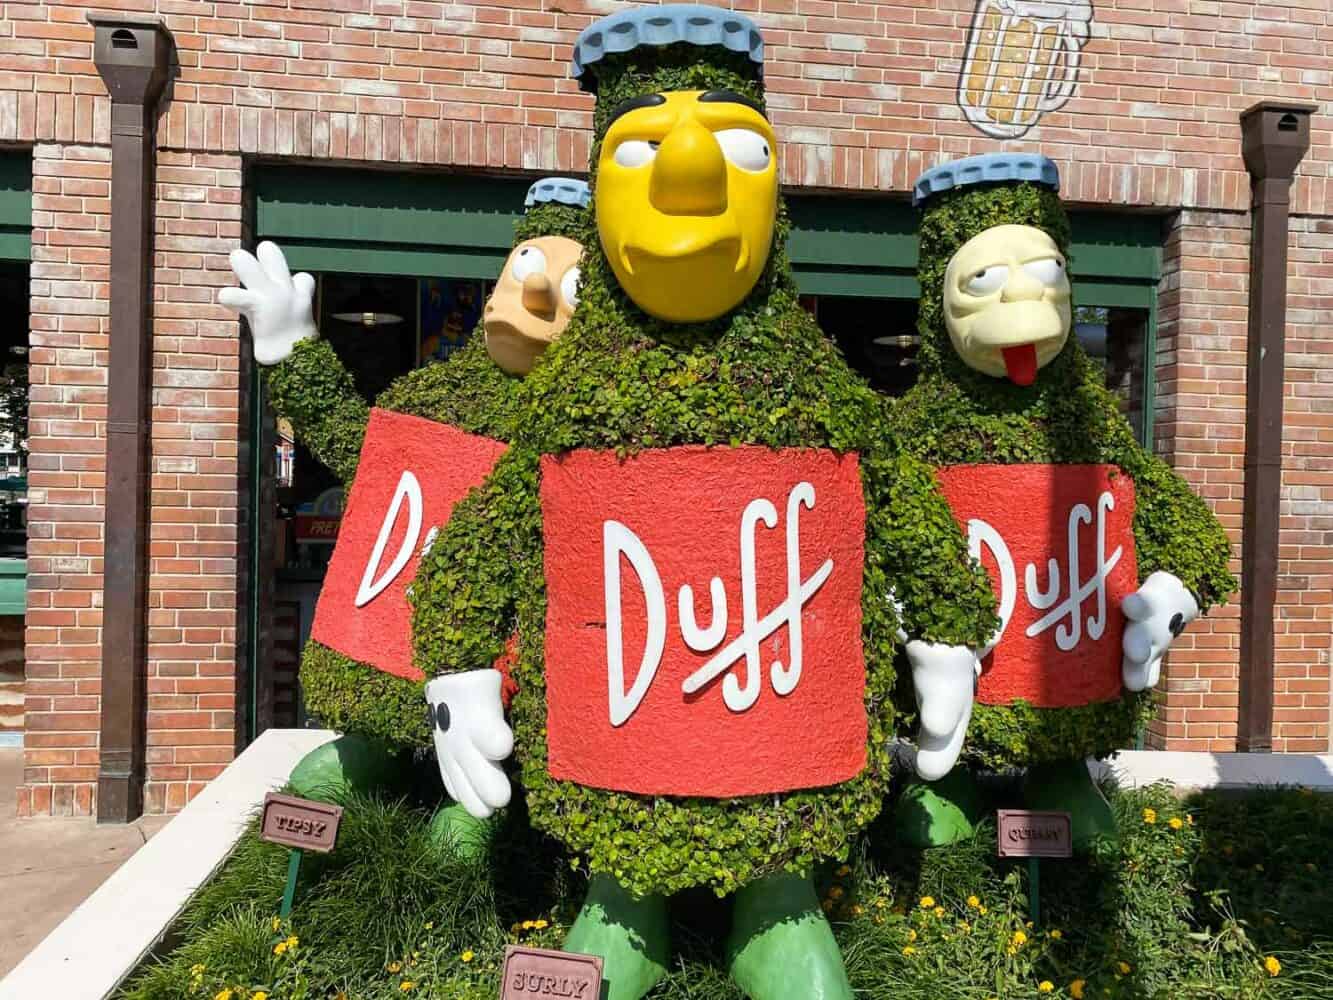 Simpsons duff beer topiary in Springfield, Universals Orlando, USA